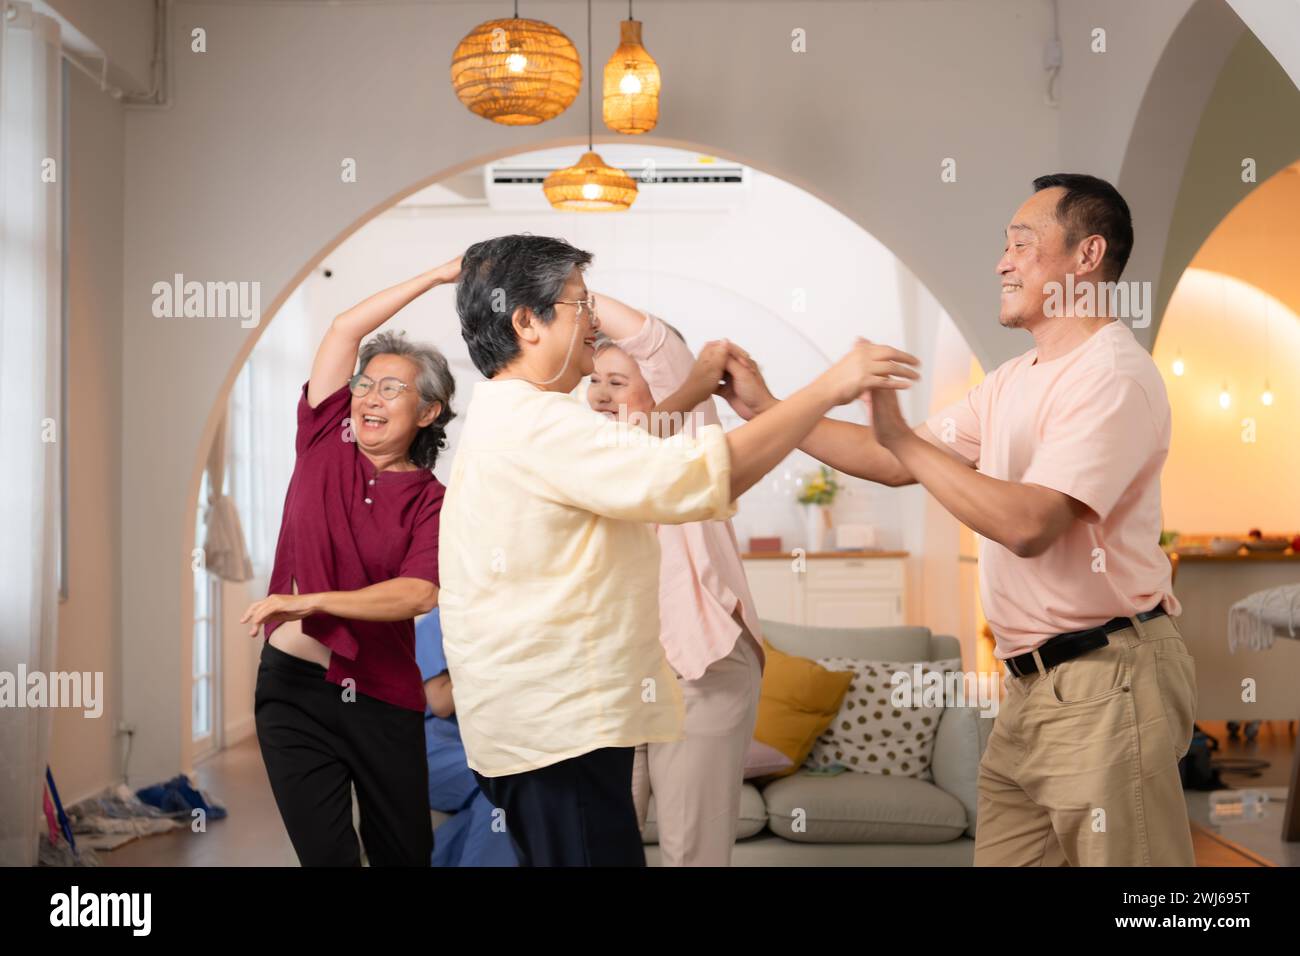 A group of elderly Asian people dance together happily, in the retirement home Stock Photo